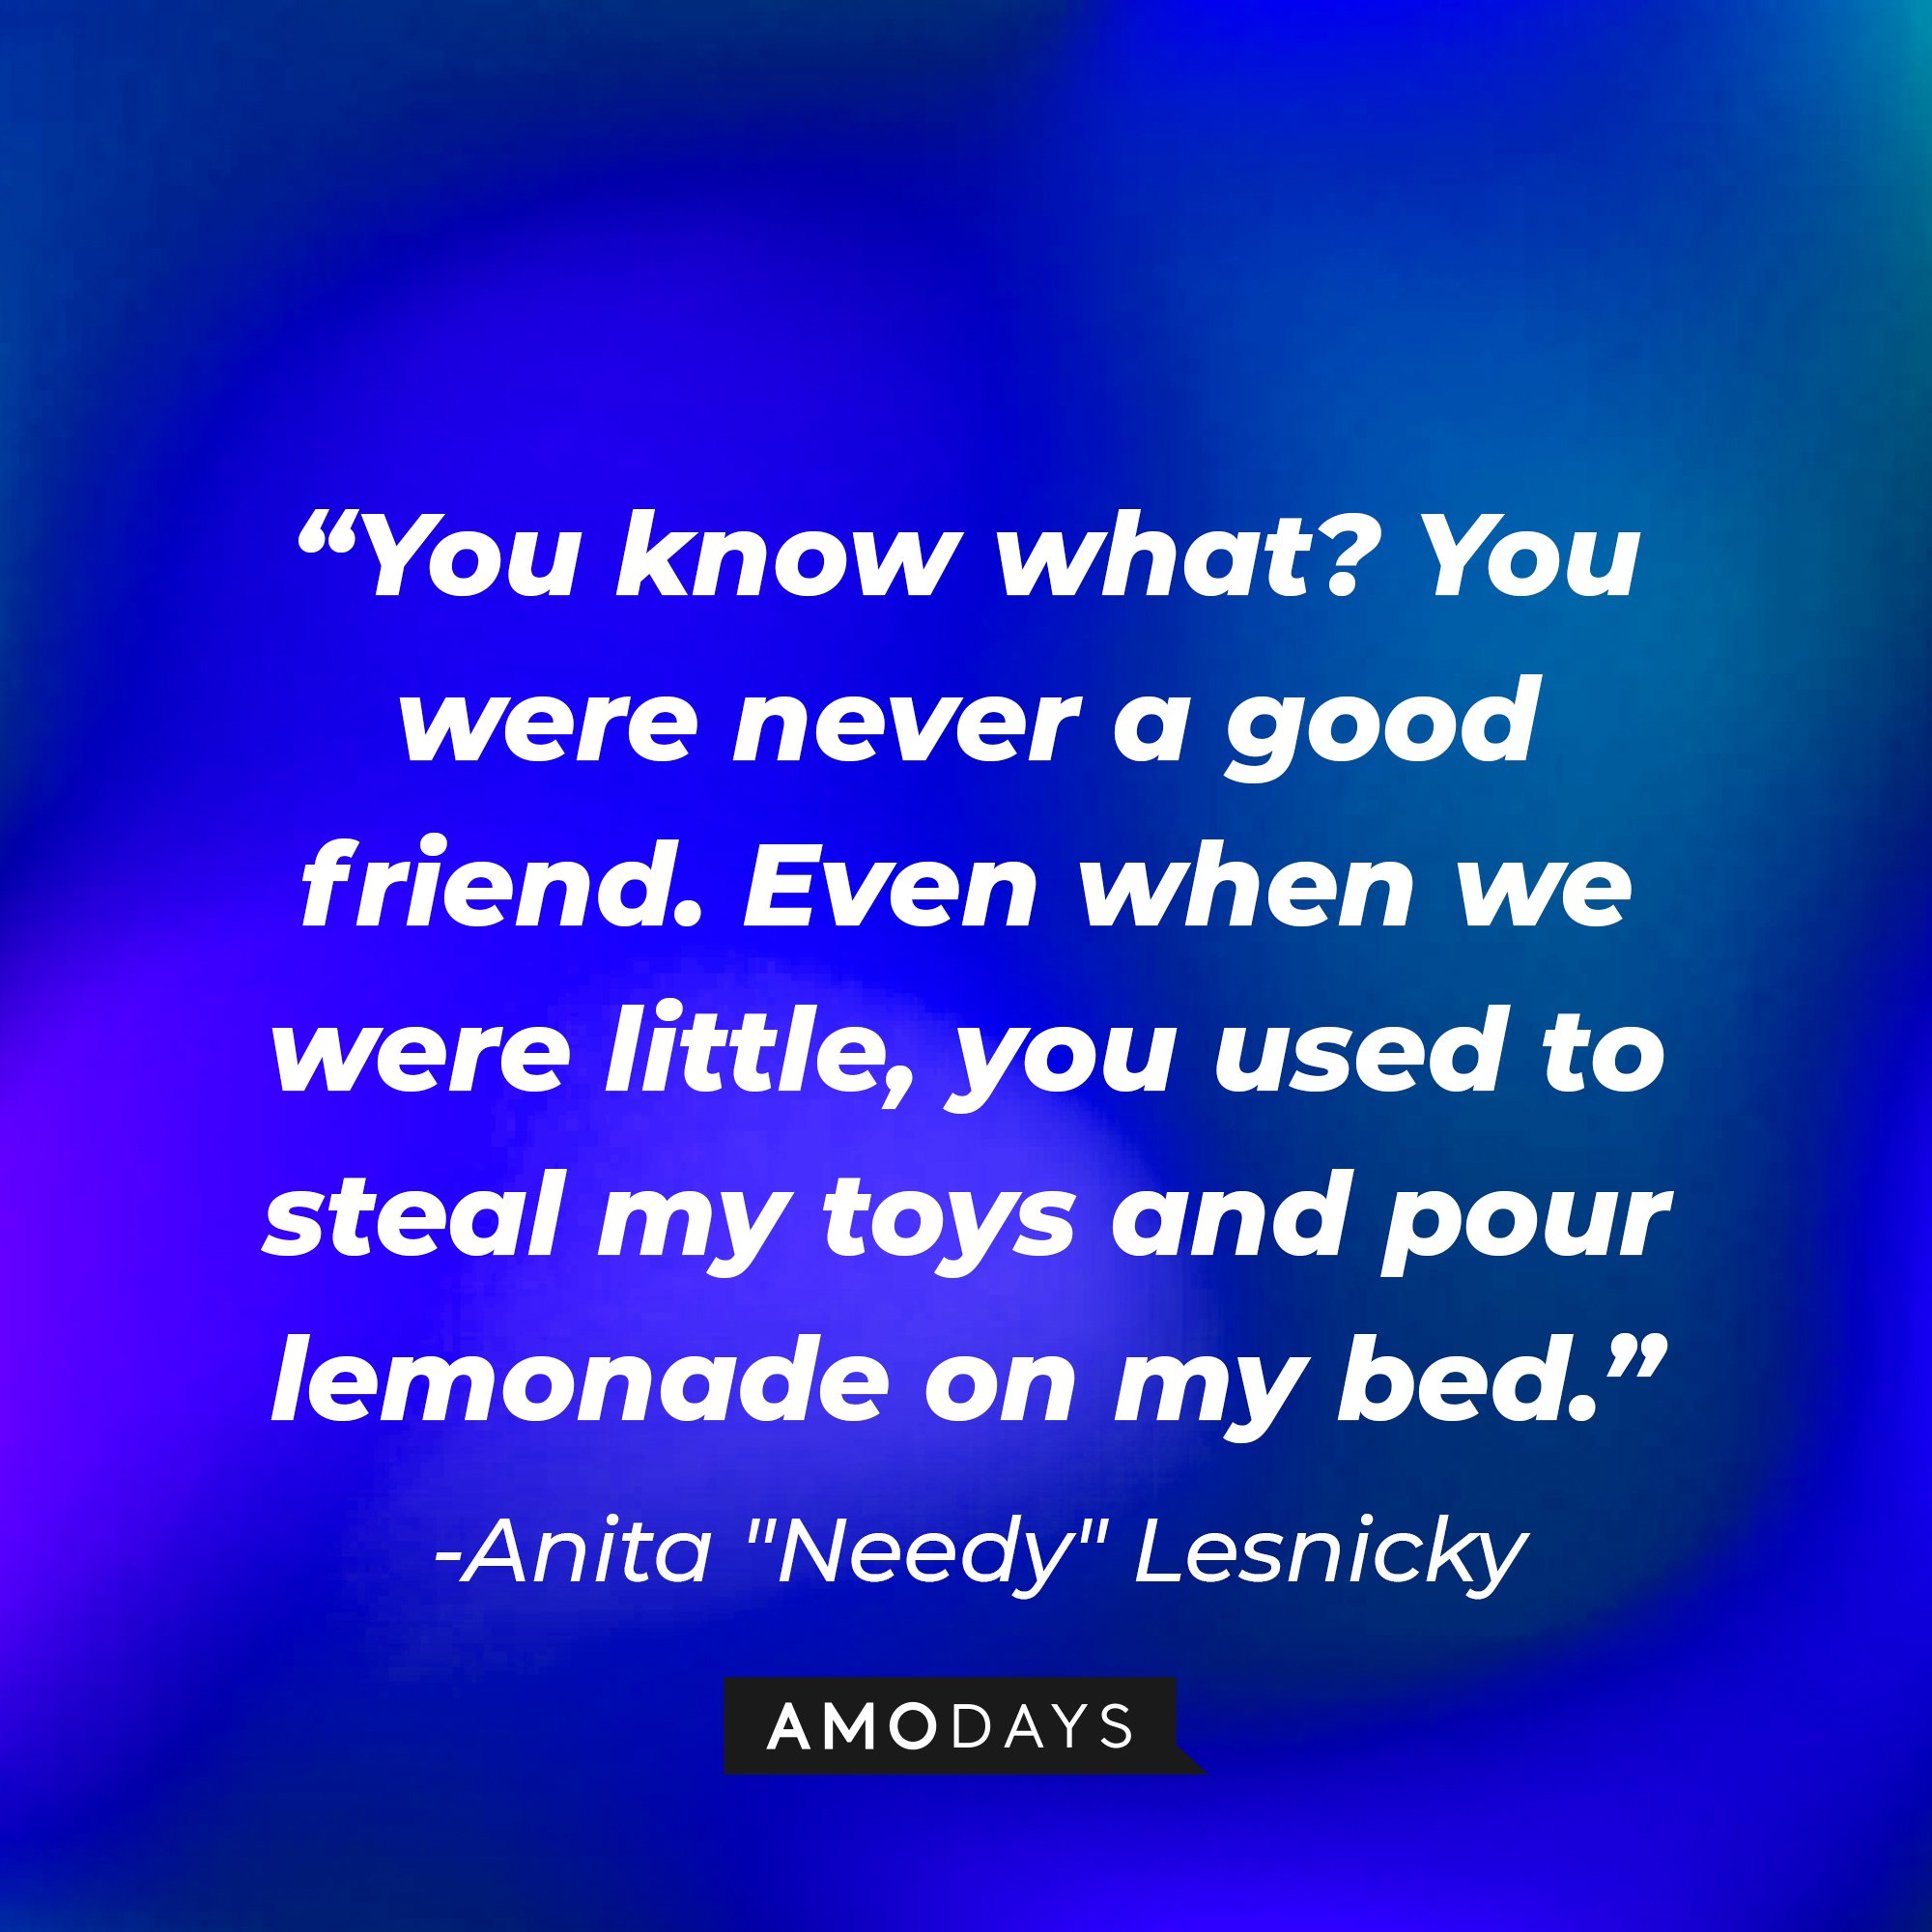 Anita "Needy" Lesnicky’s quote: quote: "You know what? You were never a good friend. Even when we were little, you used to steal my toys and pour lemonade on my bed.” | Image: AmoDays